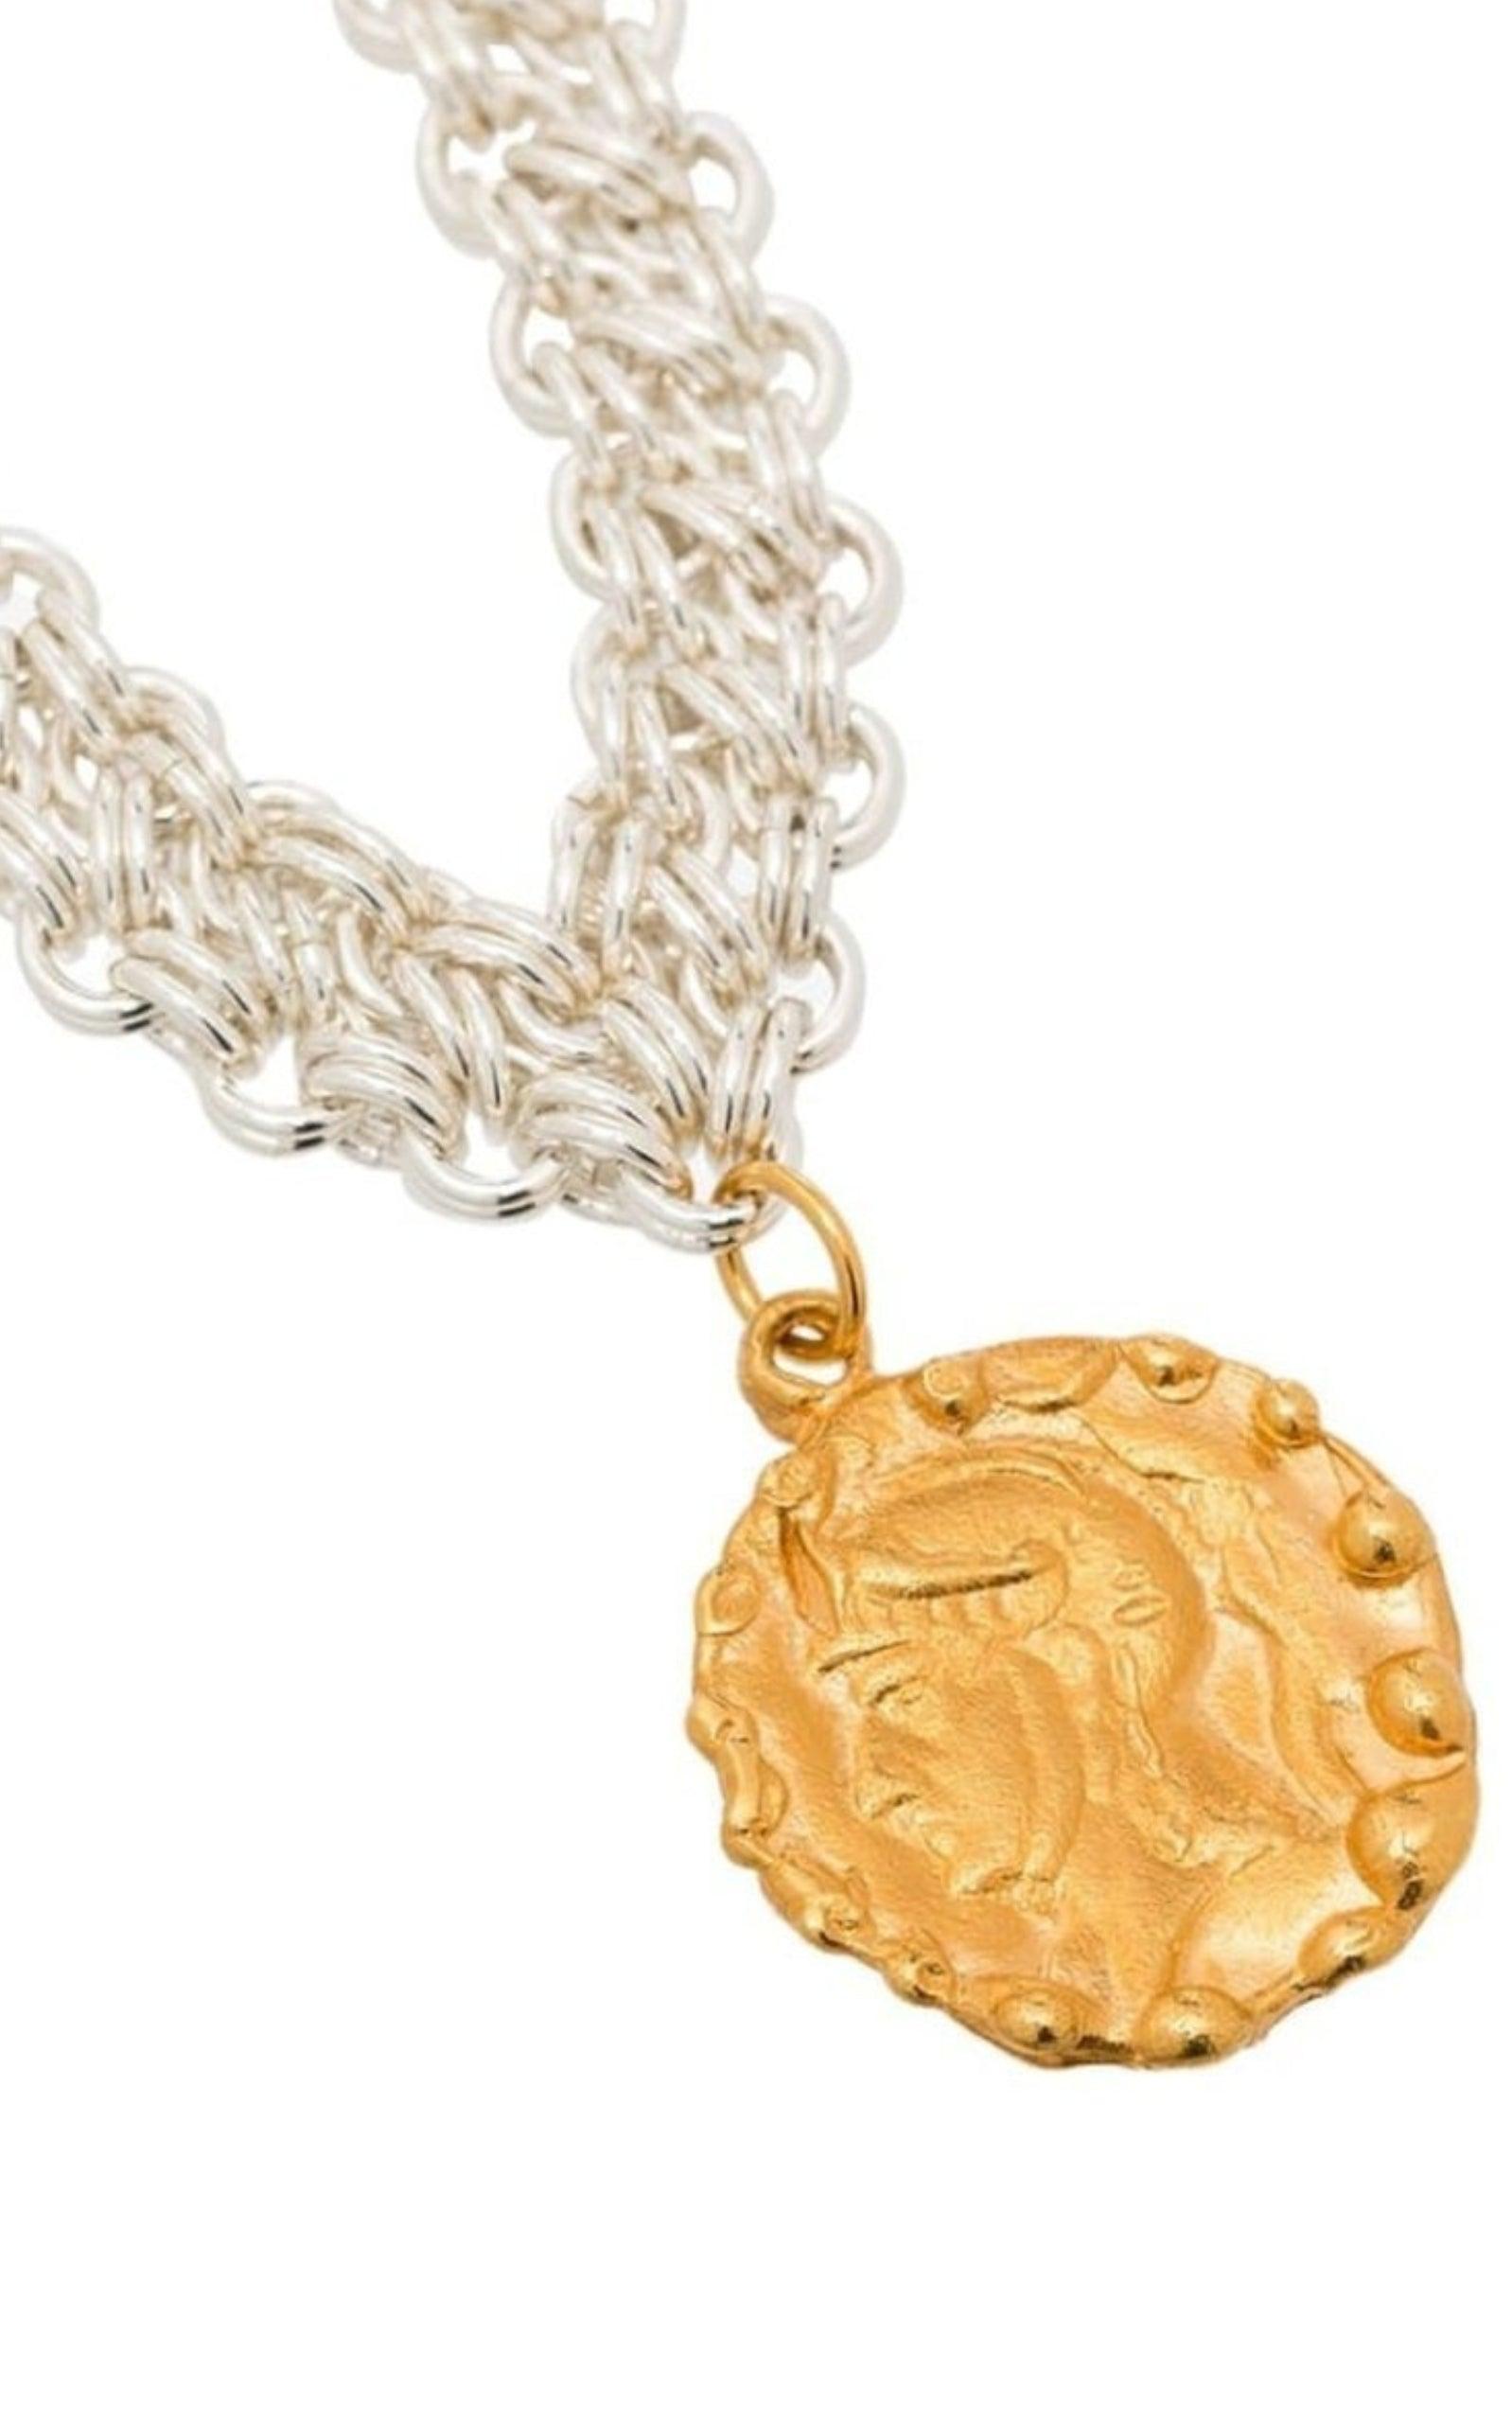  Alighieri24K Gold-Plated Woven Tapestry Amulet Necklace - Runway Catalog